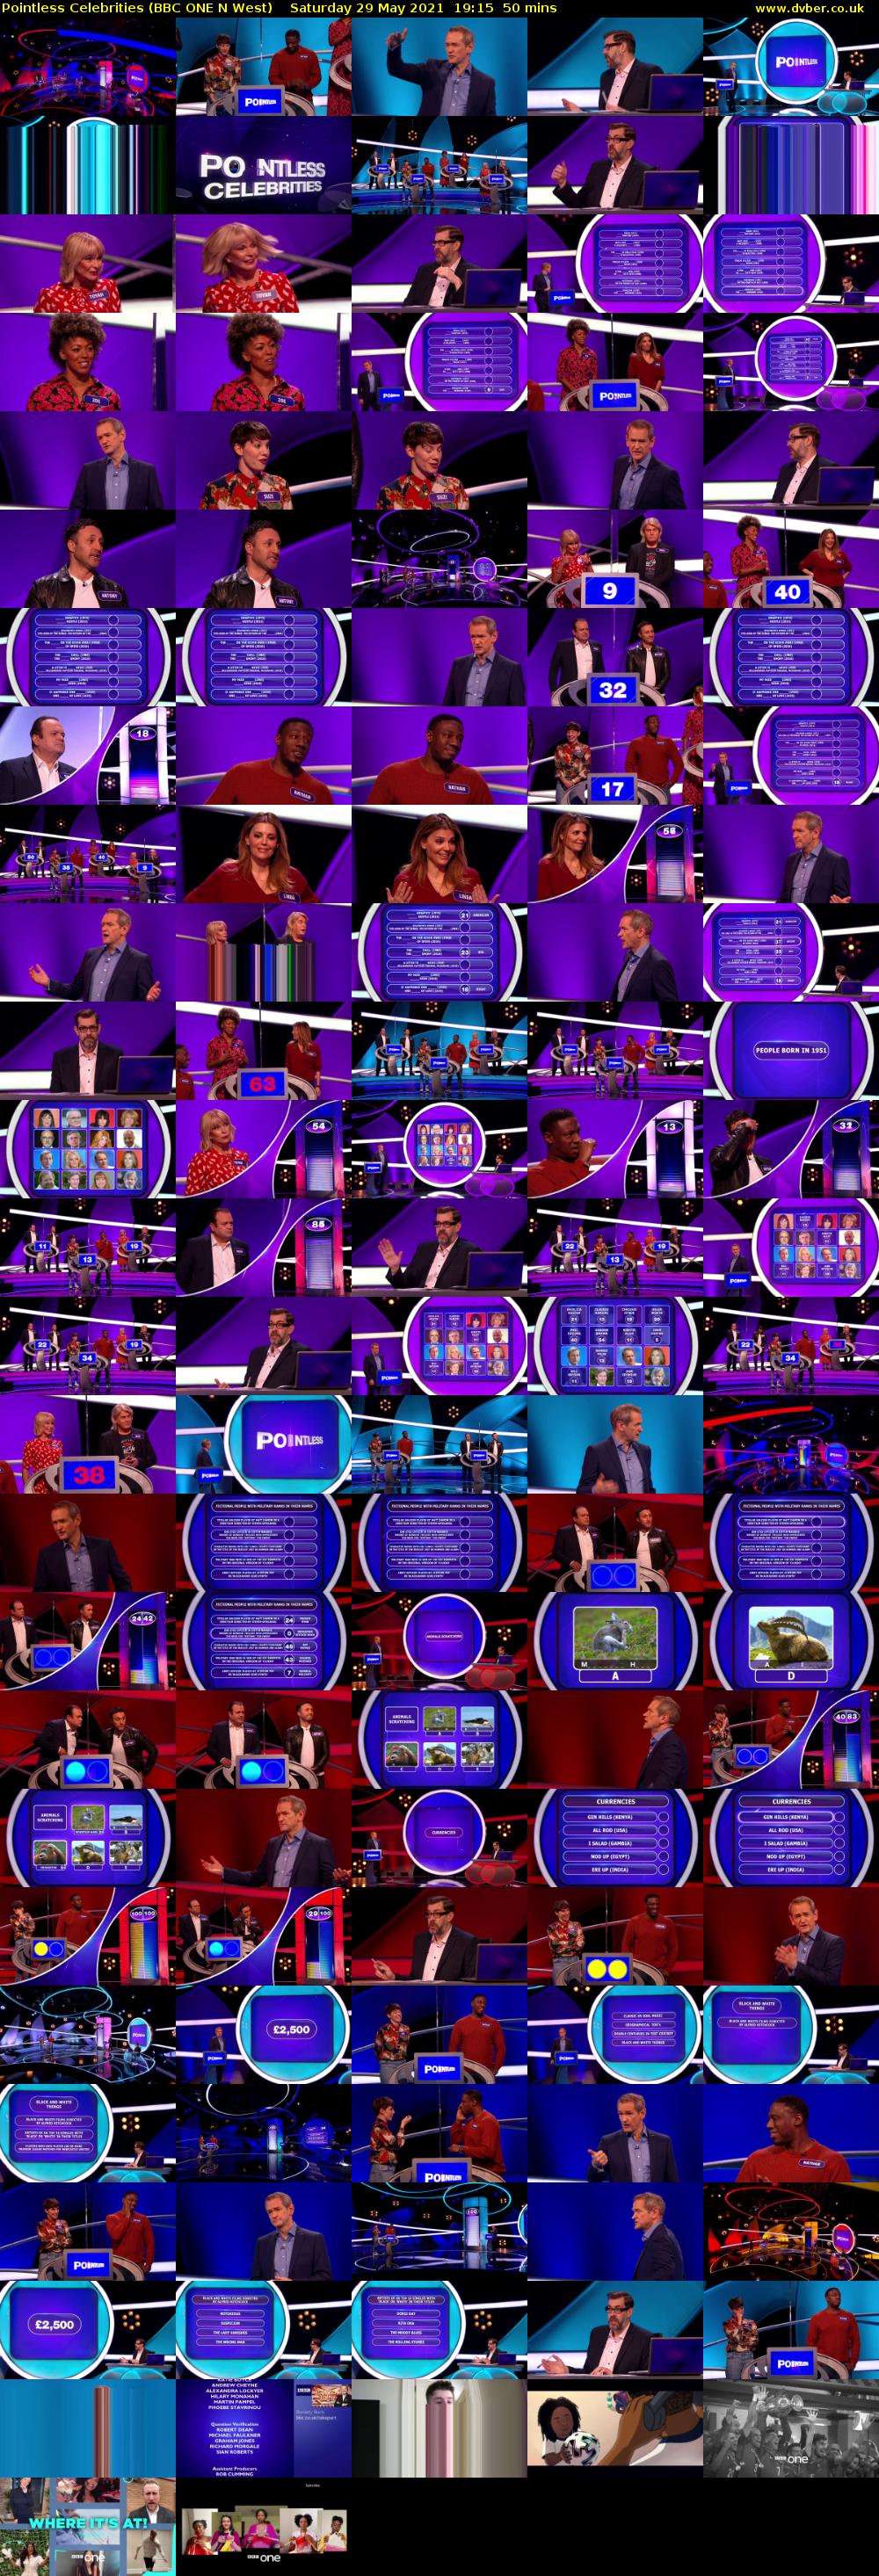 Pointless Celebrities (BBC ONE N West) Saturday 29 May 2021 19:15 - 20:05